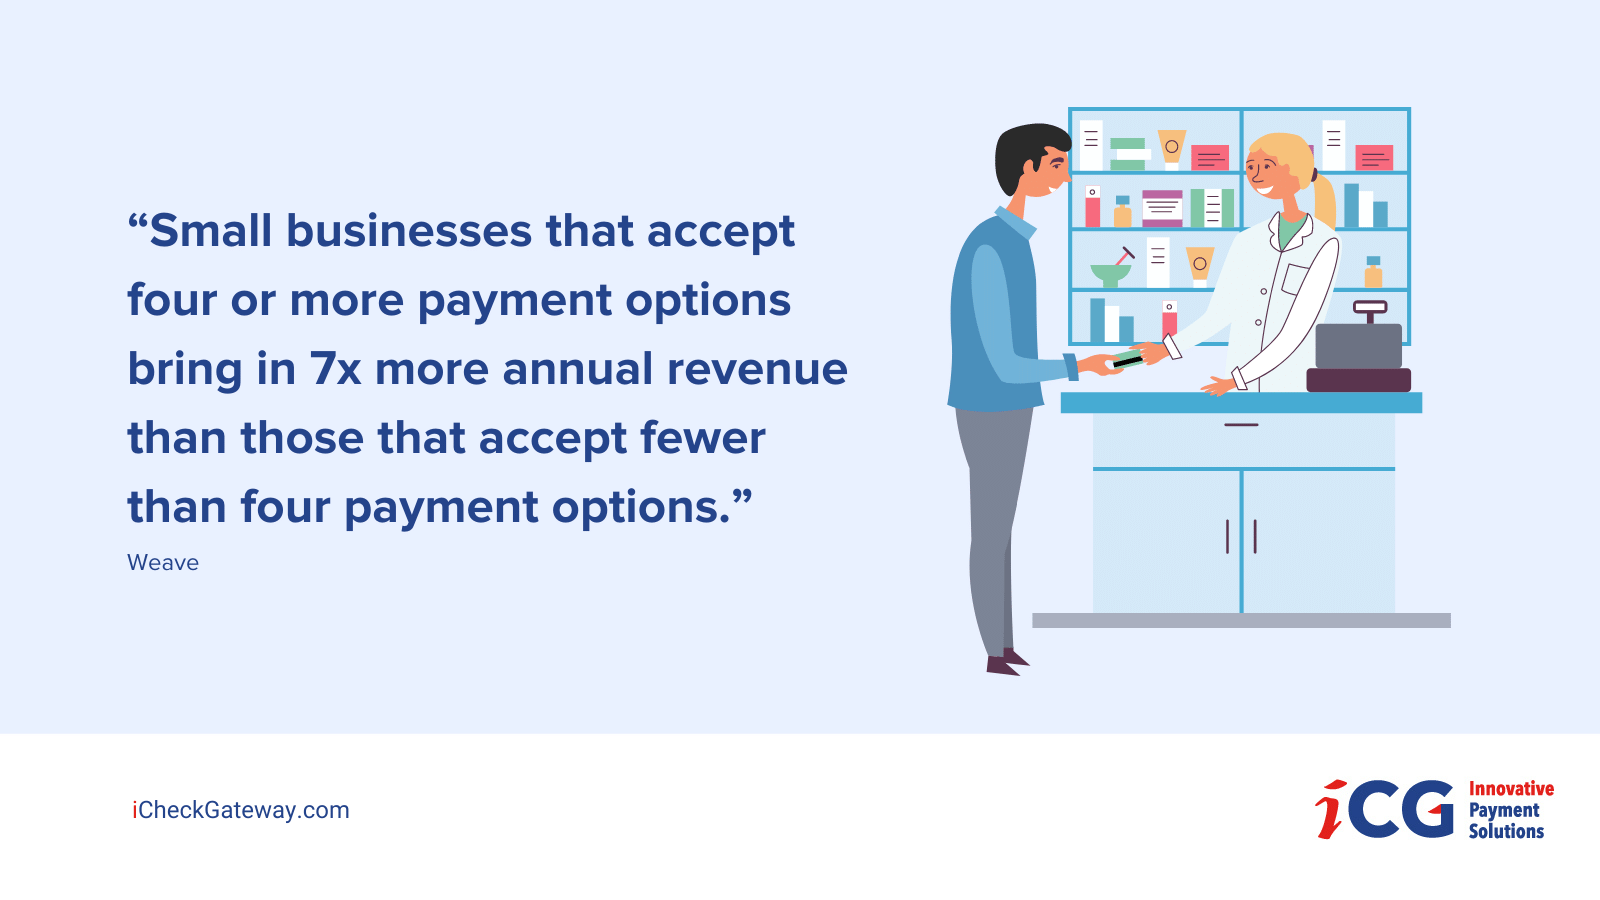 “Small businesses that accept four or more payment options bring in 7x more annual revenue than those that accept fewer than four payment options.”